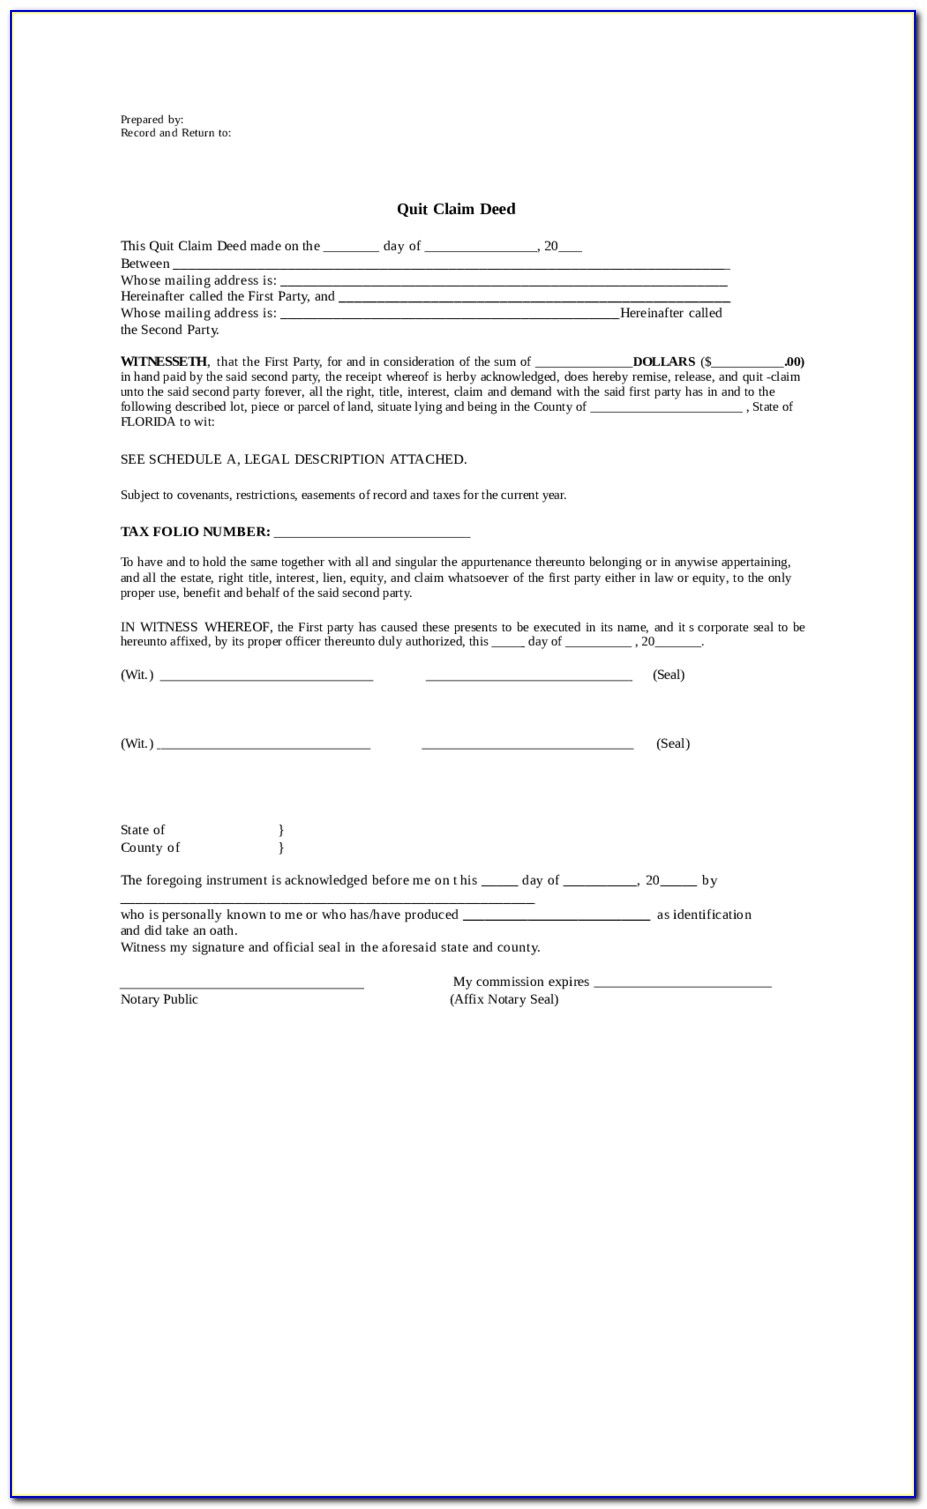 florida-quit-claim-deed-form-lee-county